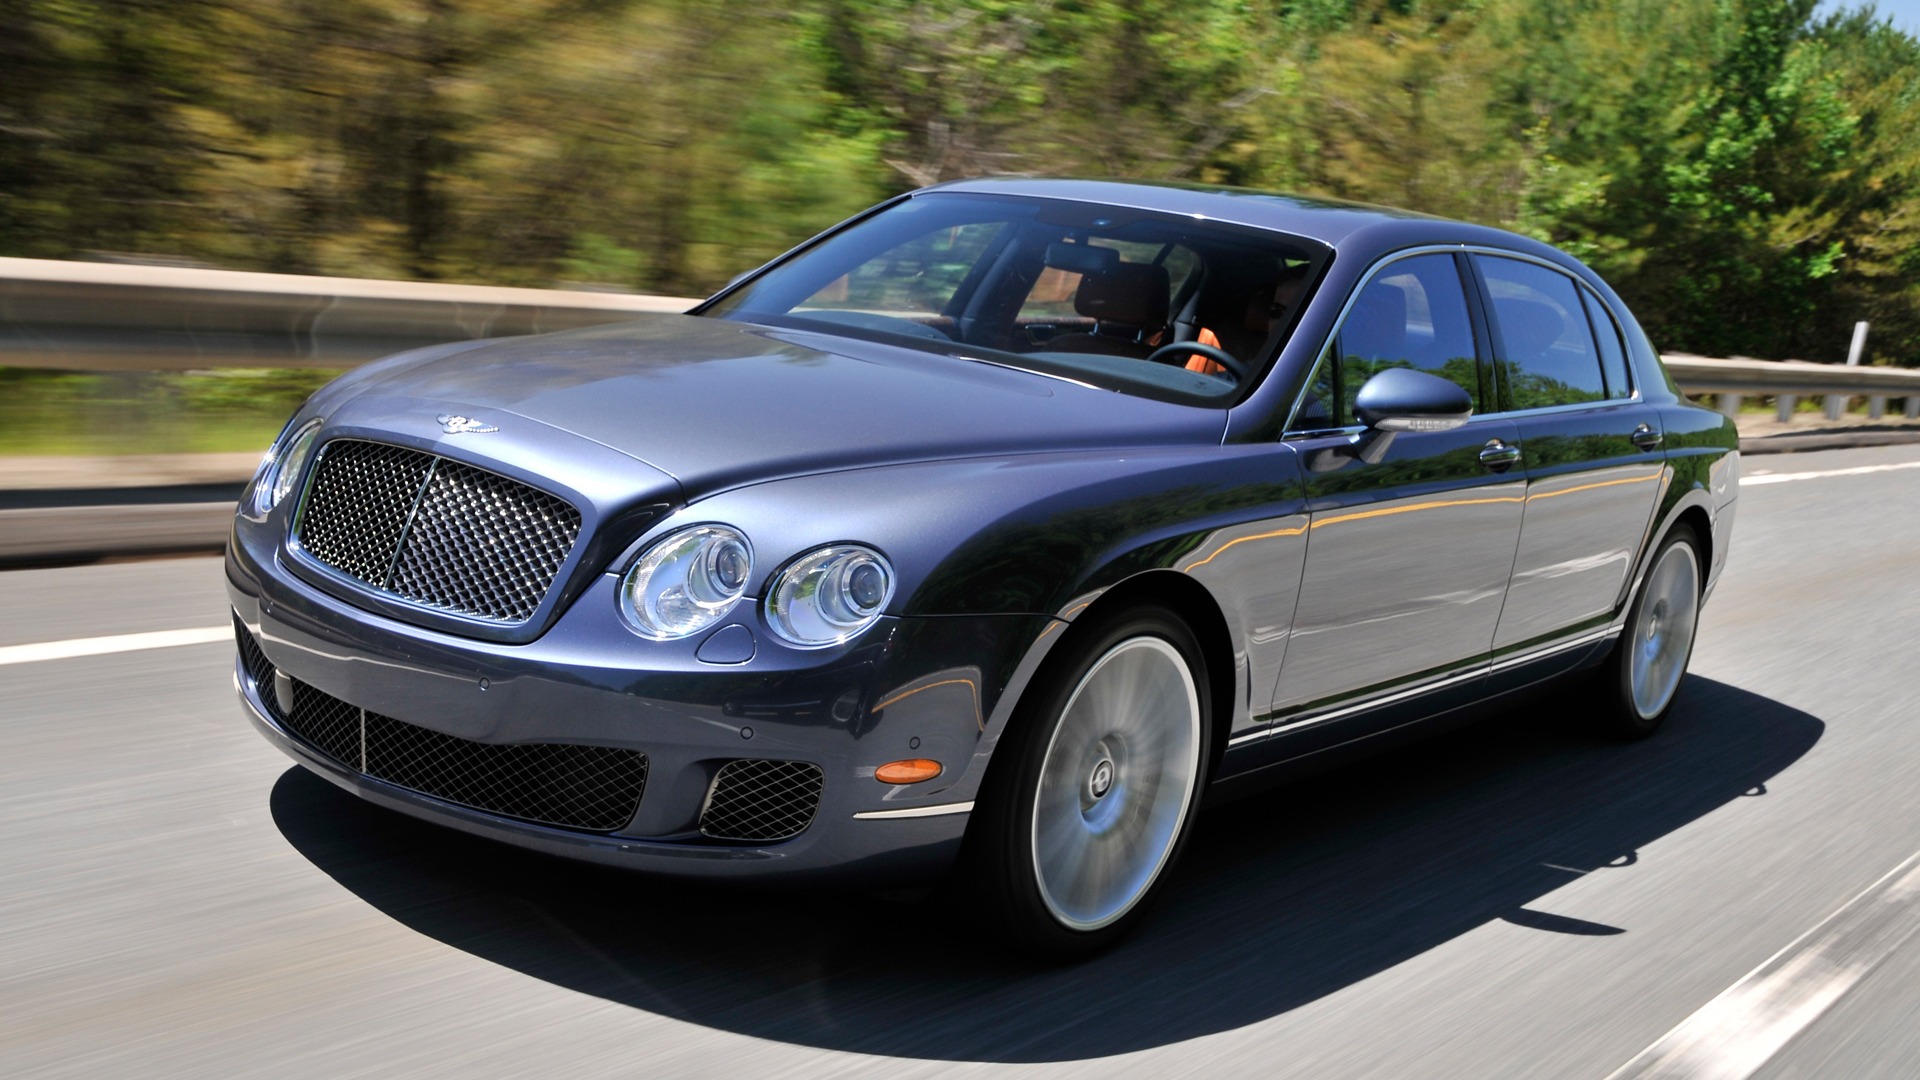 Bentley Continental Flying Spur Speed - 2008 賓利 #11 - 1920x1080